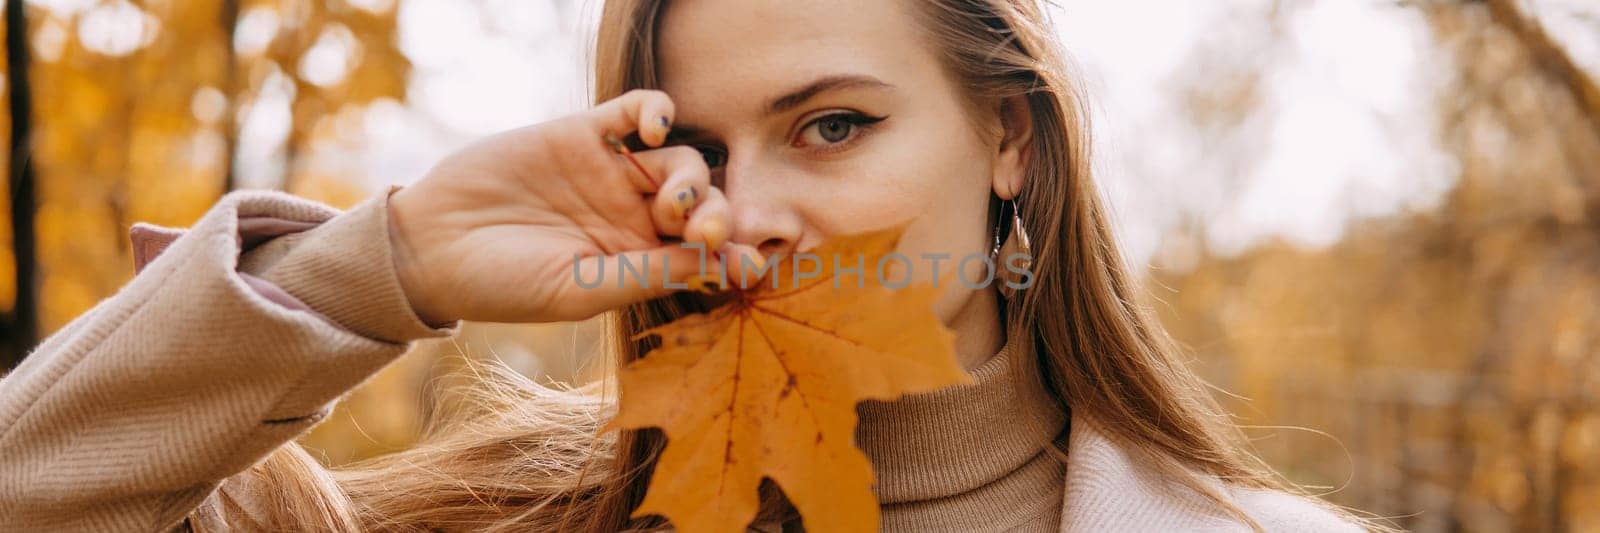 Portrait of a woman with an autumn maple leaf. Railway, autumn leaves, a young long-haired woman in a light coat coat, close-up by Annu1tochka